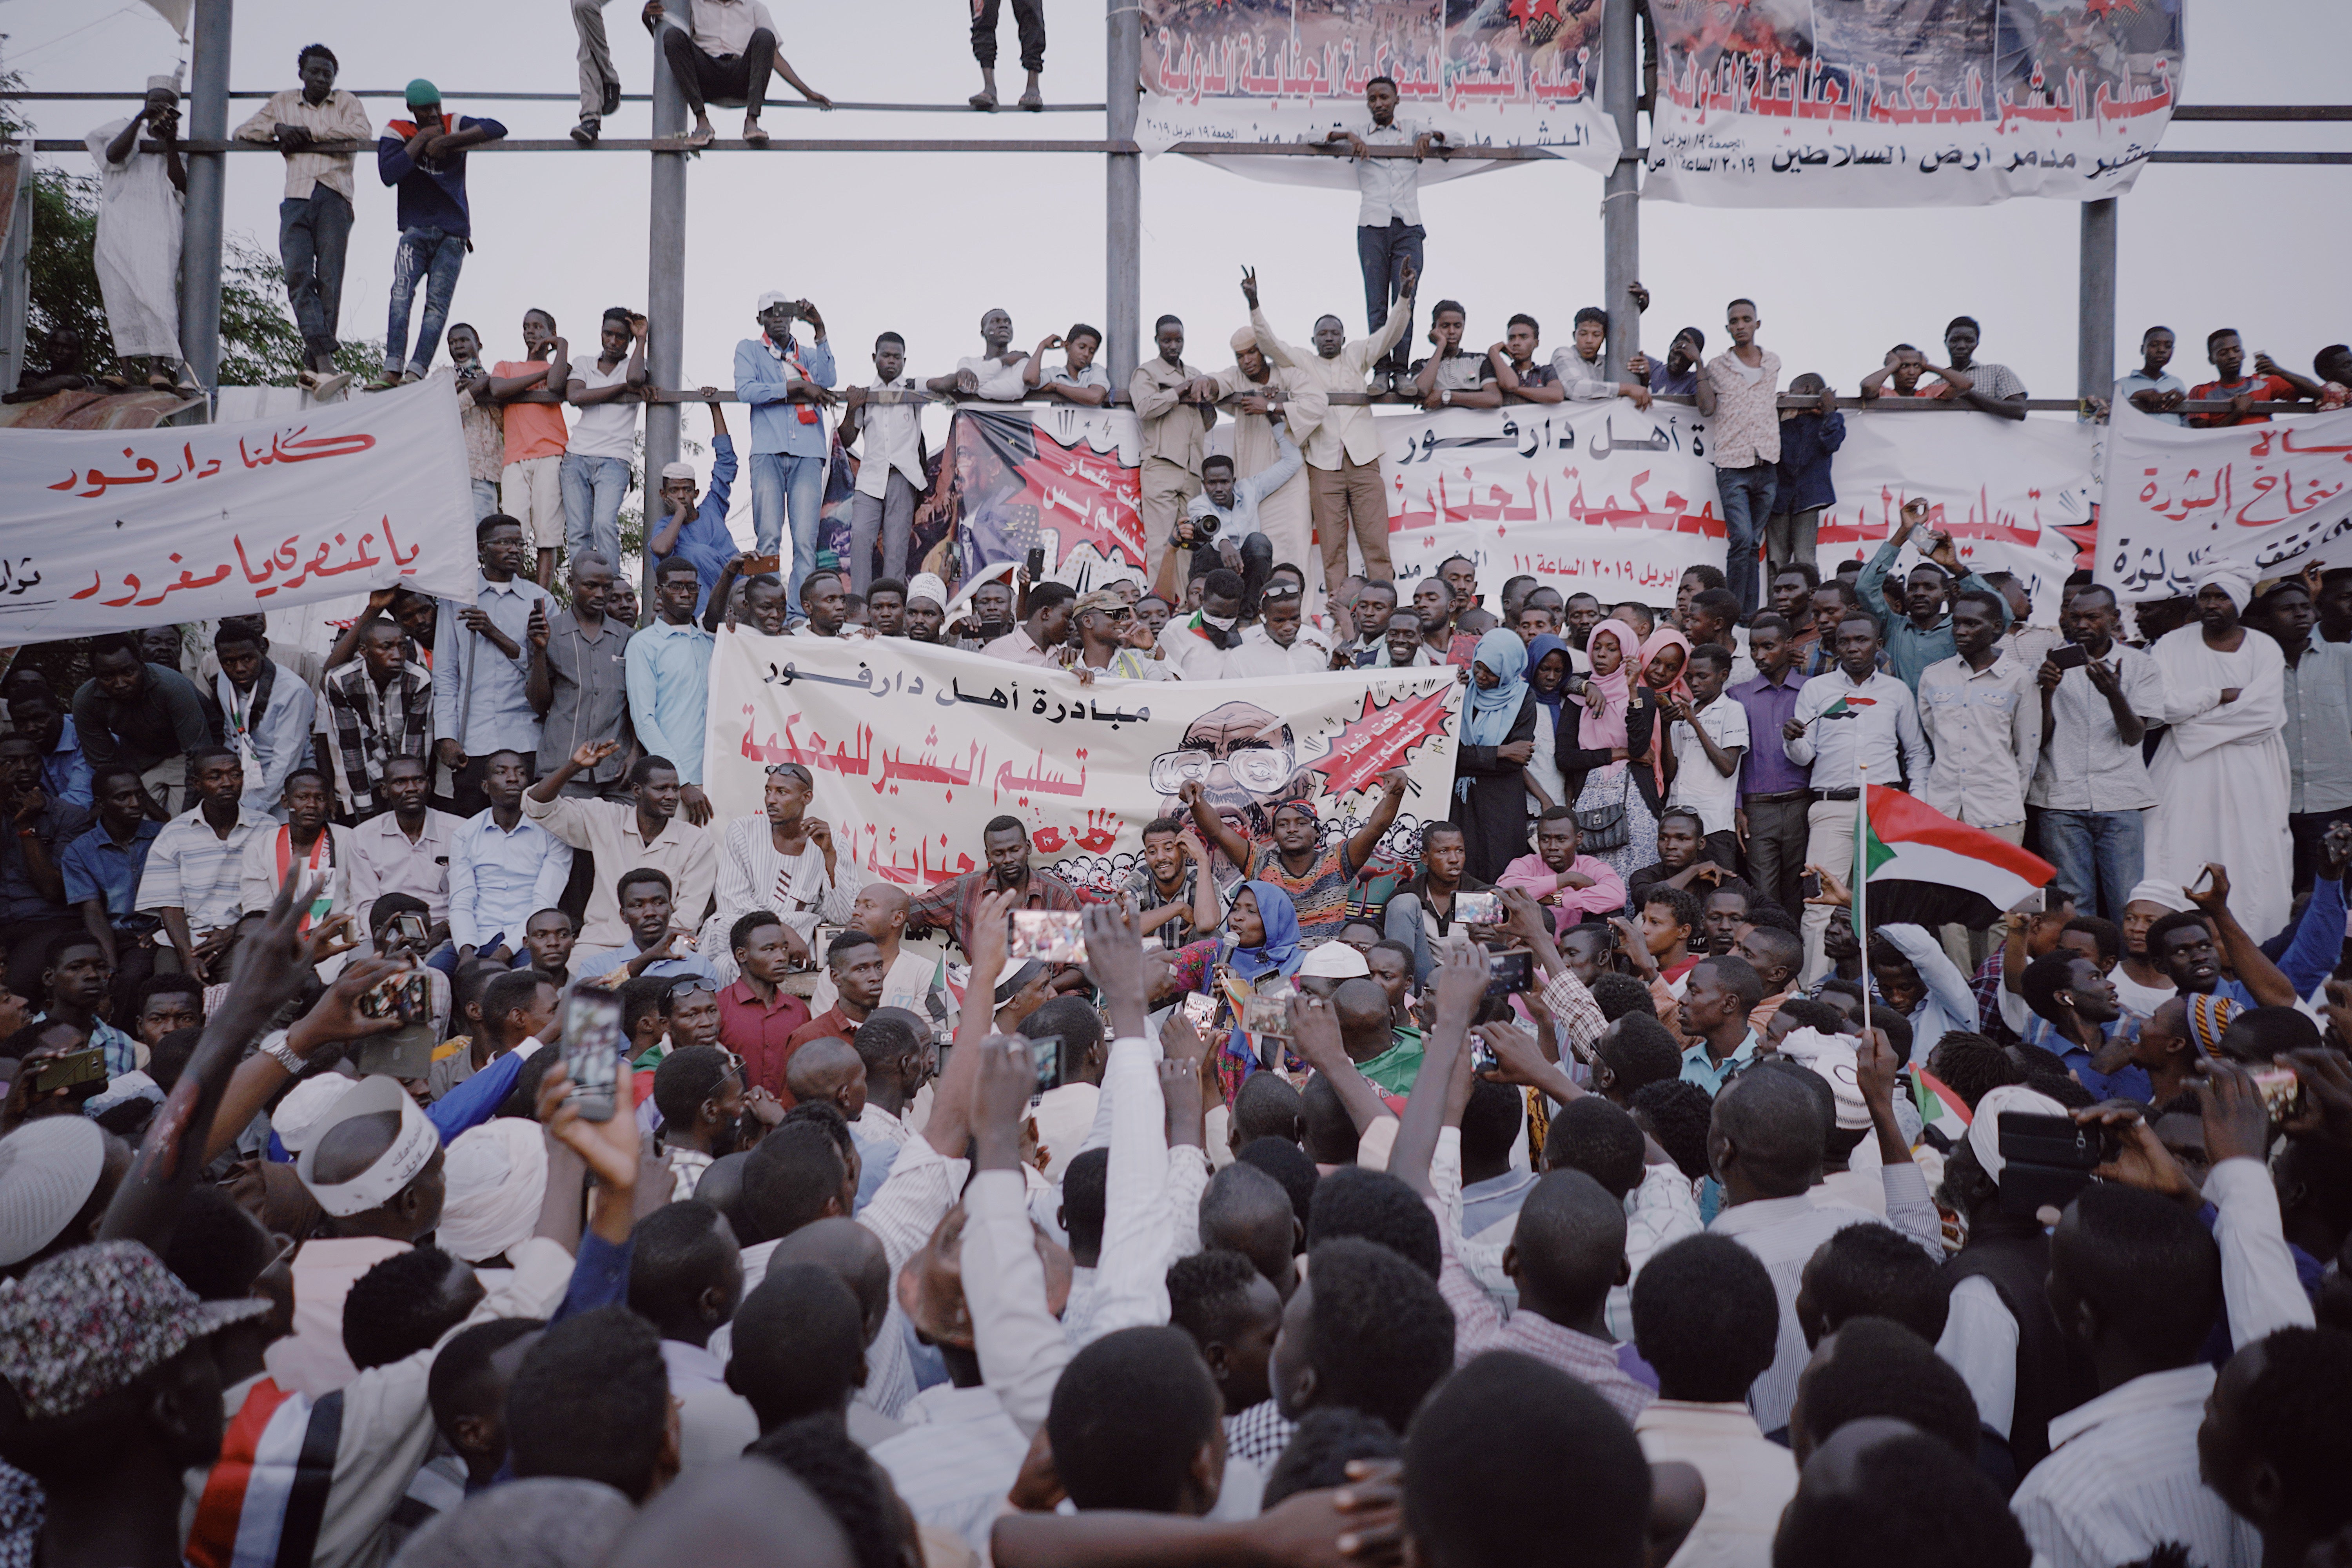 Demonstrators listen to a speech at a protest in Khartoum in 2019 following the overthrow of Omar Hassan al-Bashir